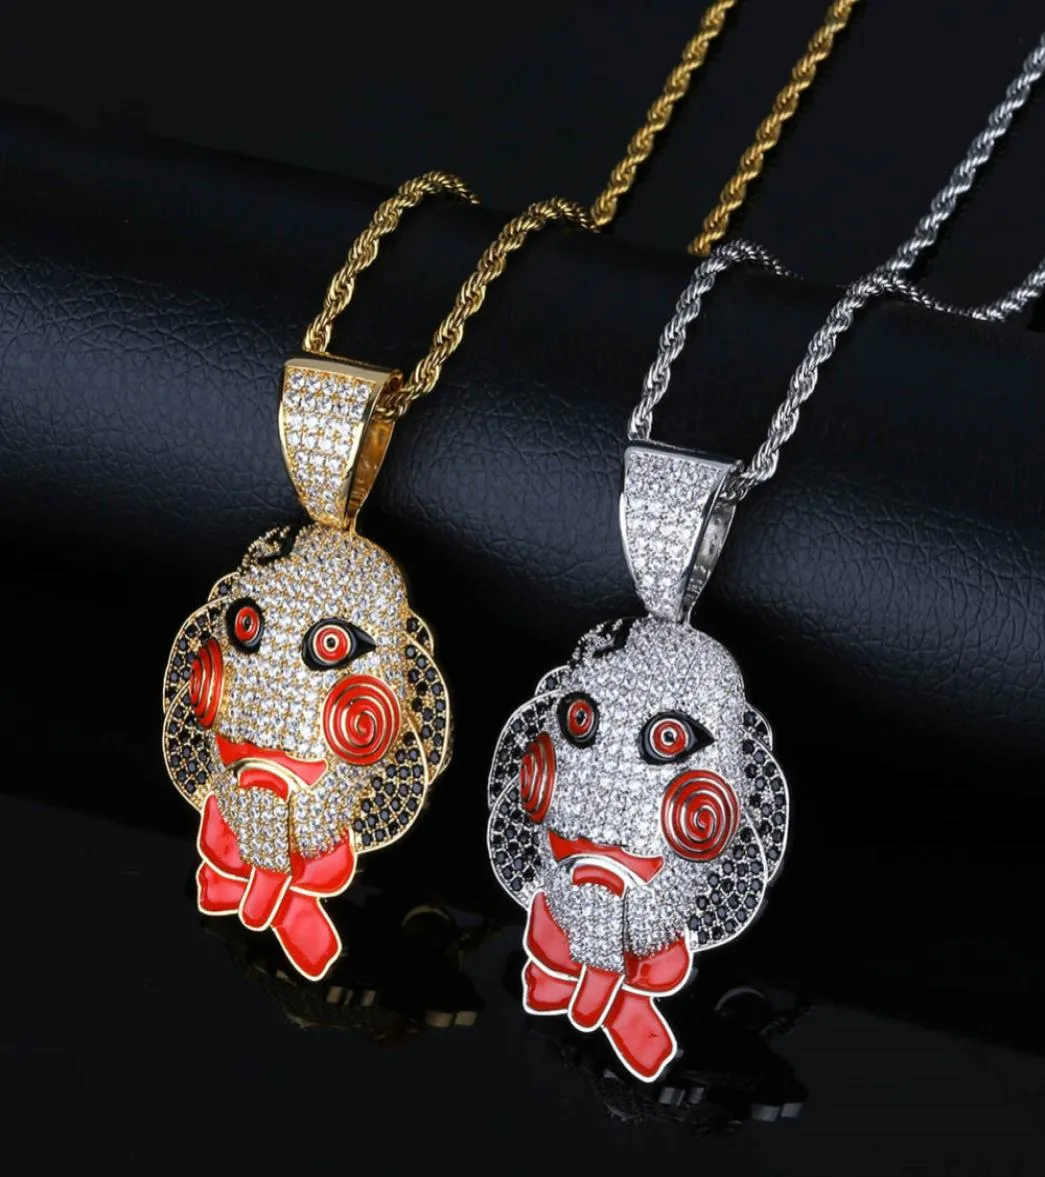 69 Saw Doll Head Mask Pendant Necklace Iced Out Cubic Zircon Hip Hop Gold Silver Color Men Women Charms Chain Jewelry9514200